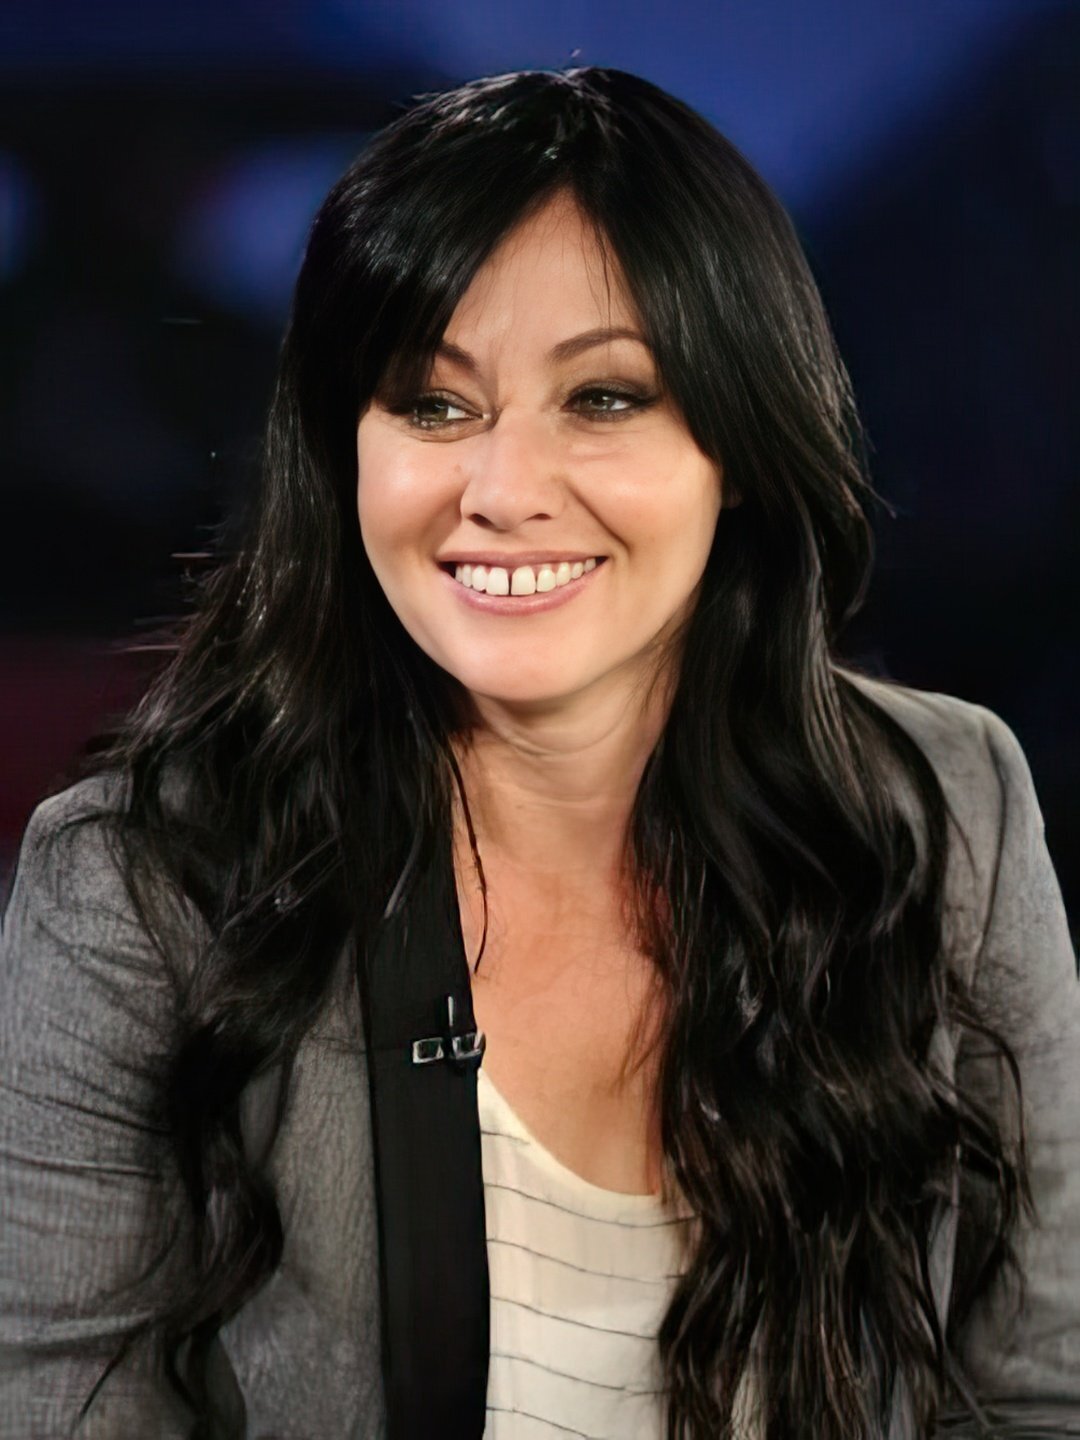 Shannen Doherty story of success